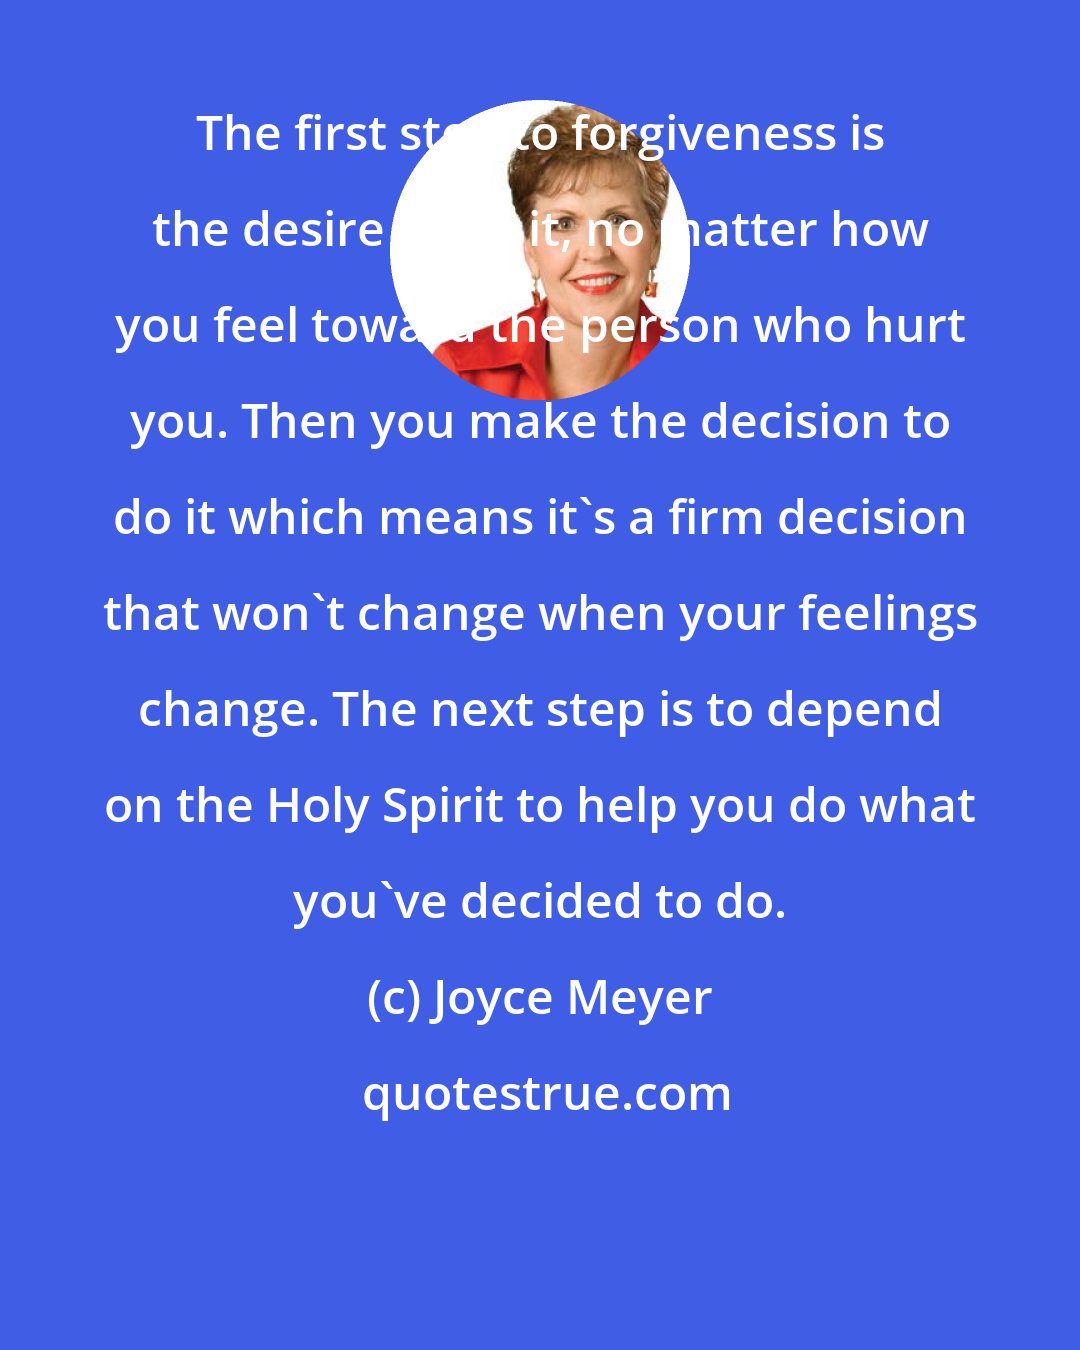 Joyce Meyer: The first step to forgiveness is the desire to do it, no matter how you feel toward the person who hurt you. Then you make the decision to do it which means it's a firm decision that won't change when your feelings change. The next step is to depend on the Holy Spirit to help you do what you've decided to do.